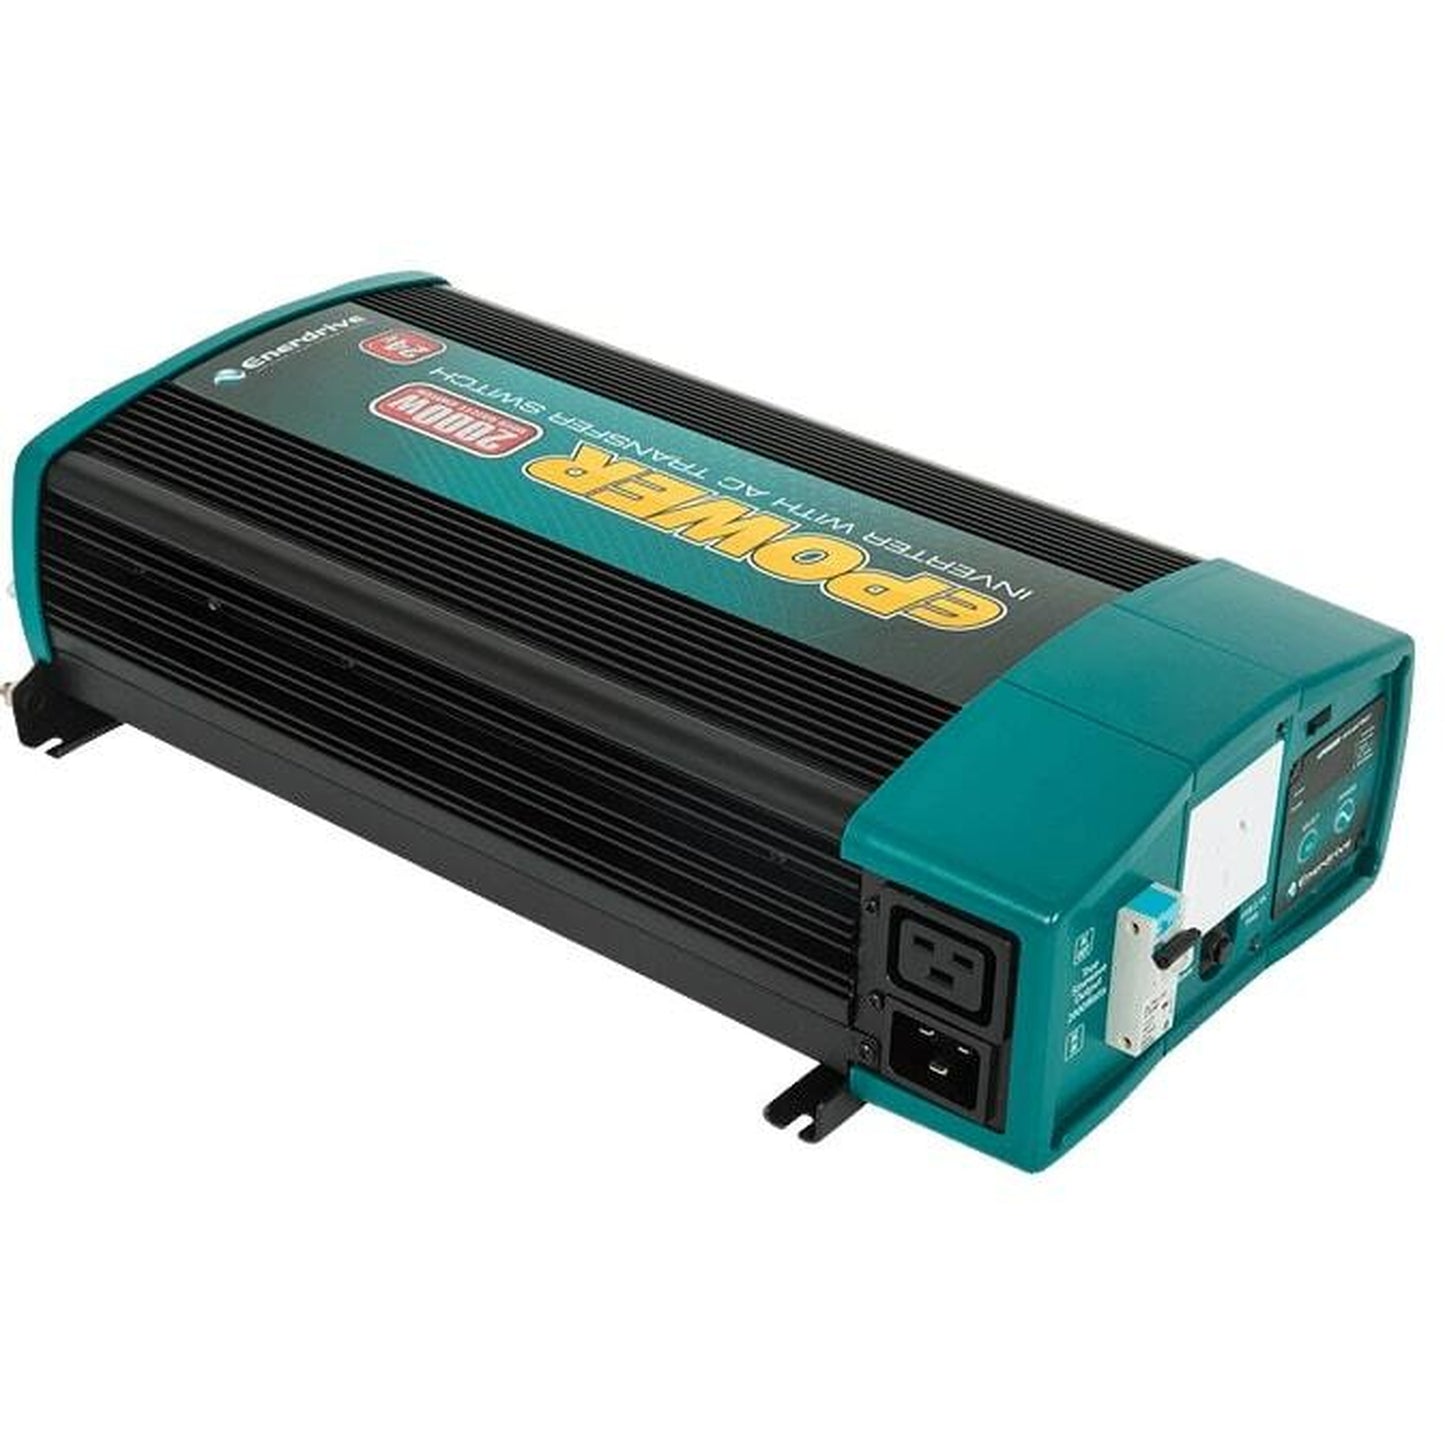 Enerdrive ePOWER 2000W 24V Pure Sine Wave Inverter with RCD & AC Transfer Switch